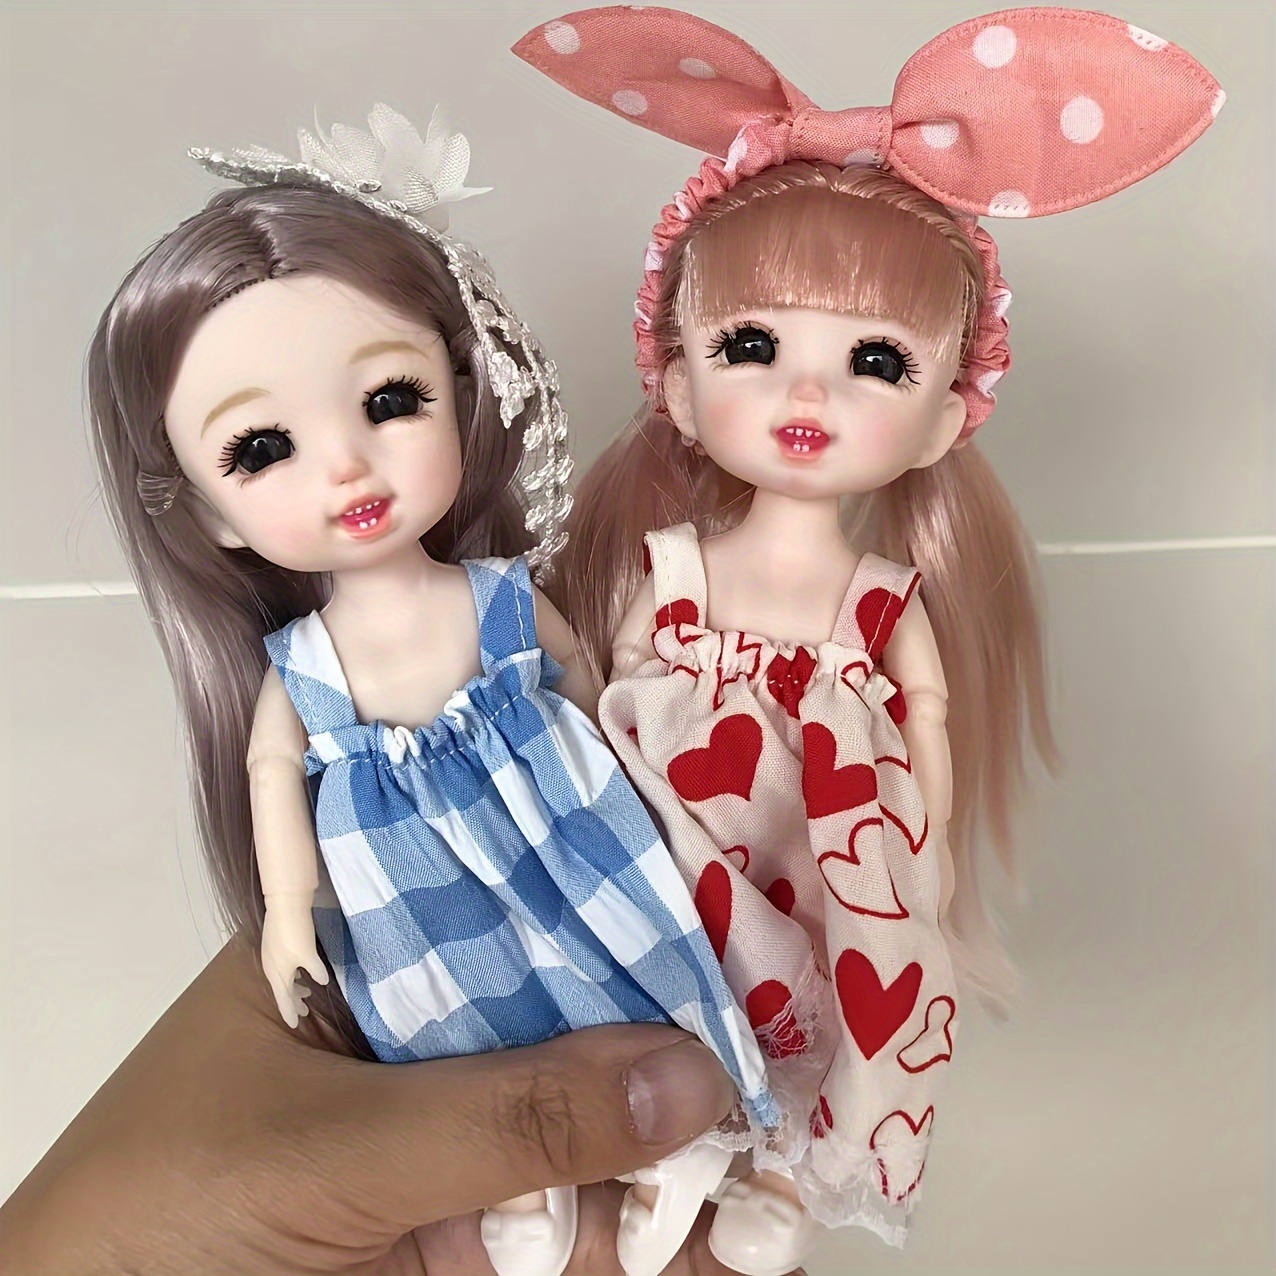 Kawaii Fashion Doll Accessories Set For Kens Pretend Play And Barbie Lovers  DIY Childrens Game From Qsmartoy, $5.49